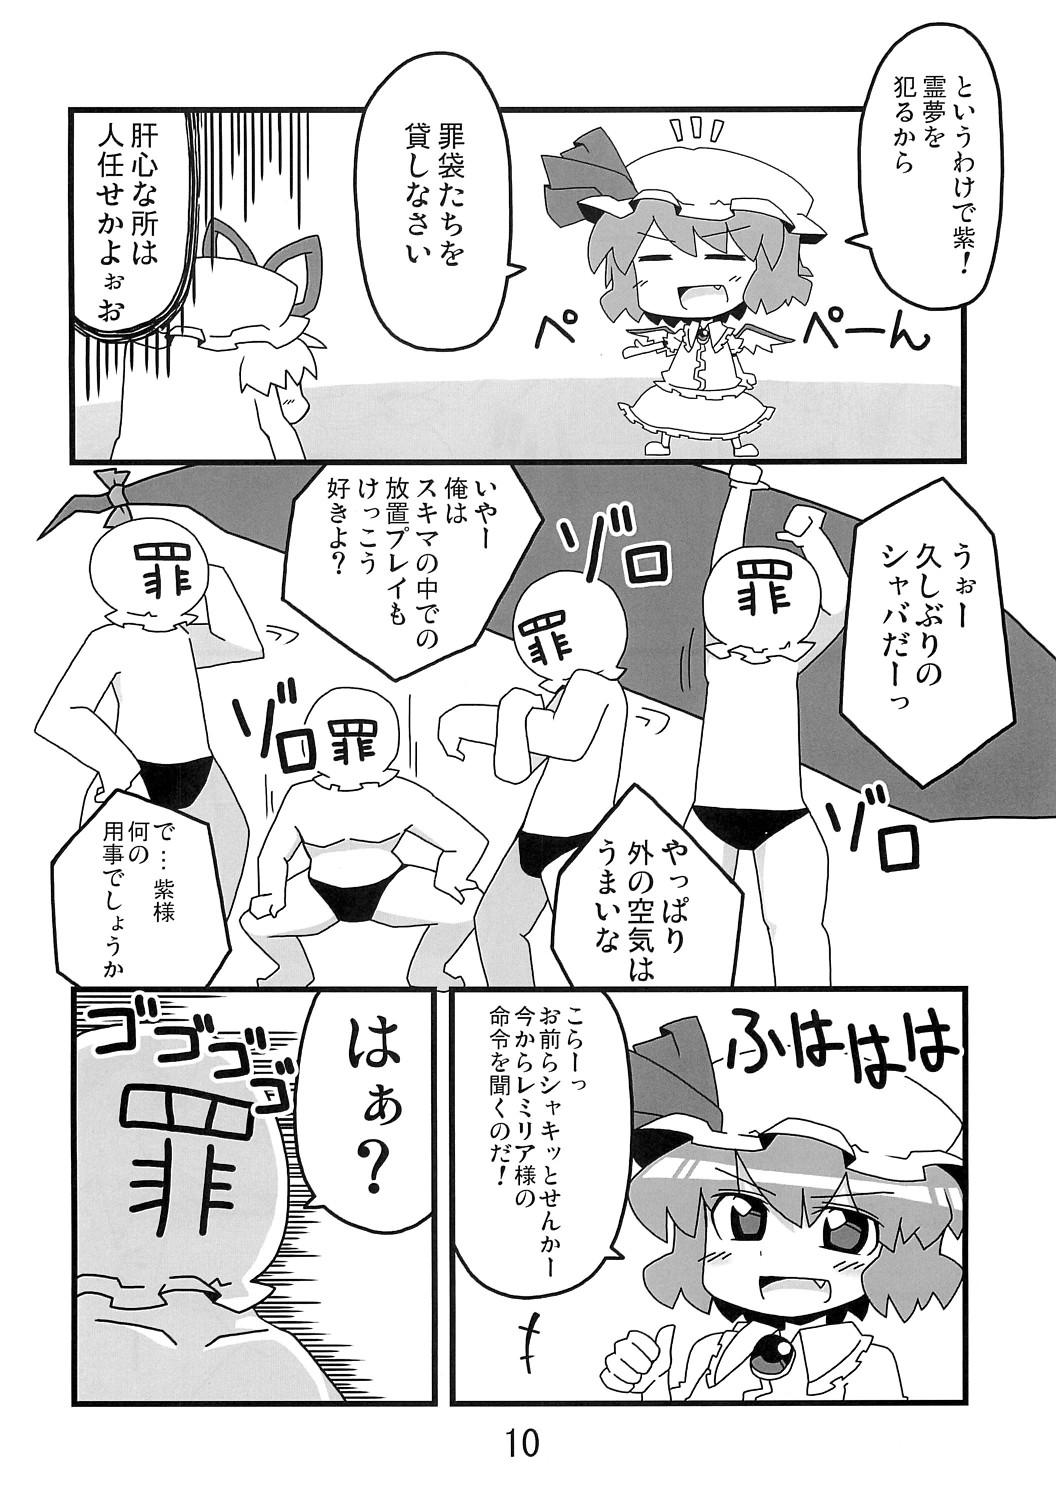 Teenager 東方豊年祭 - Touhou project Tamil - Page 9